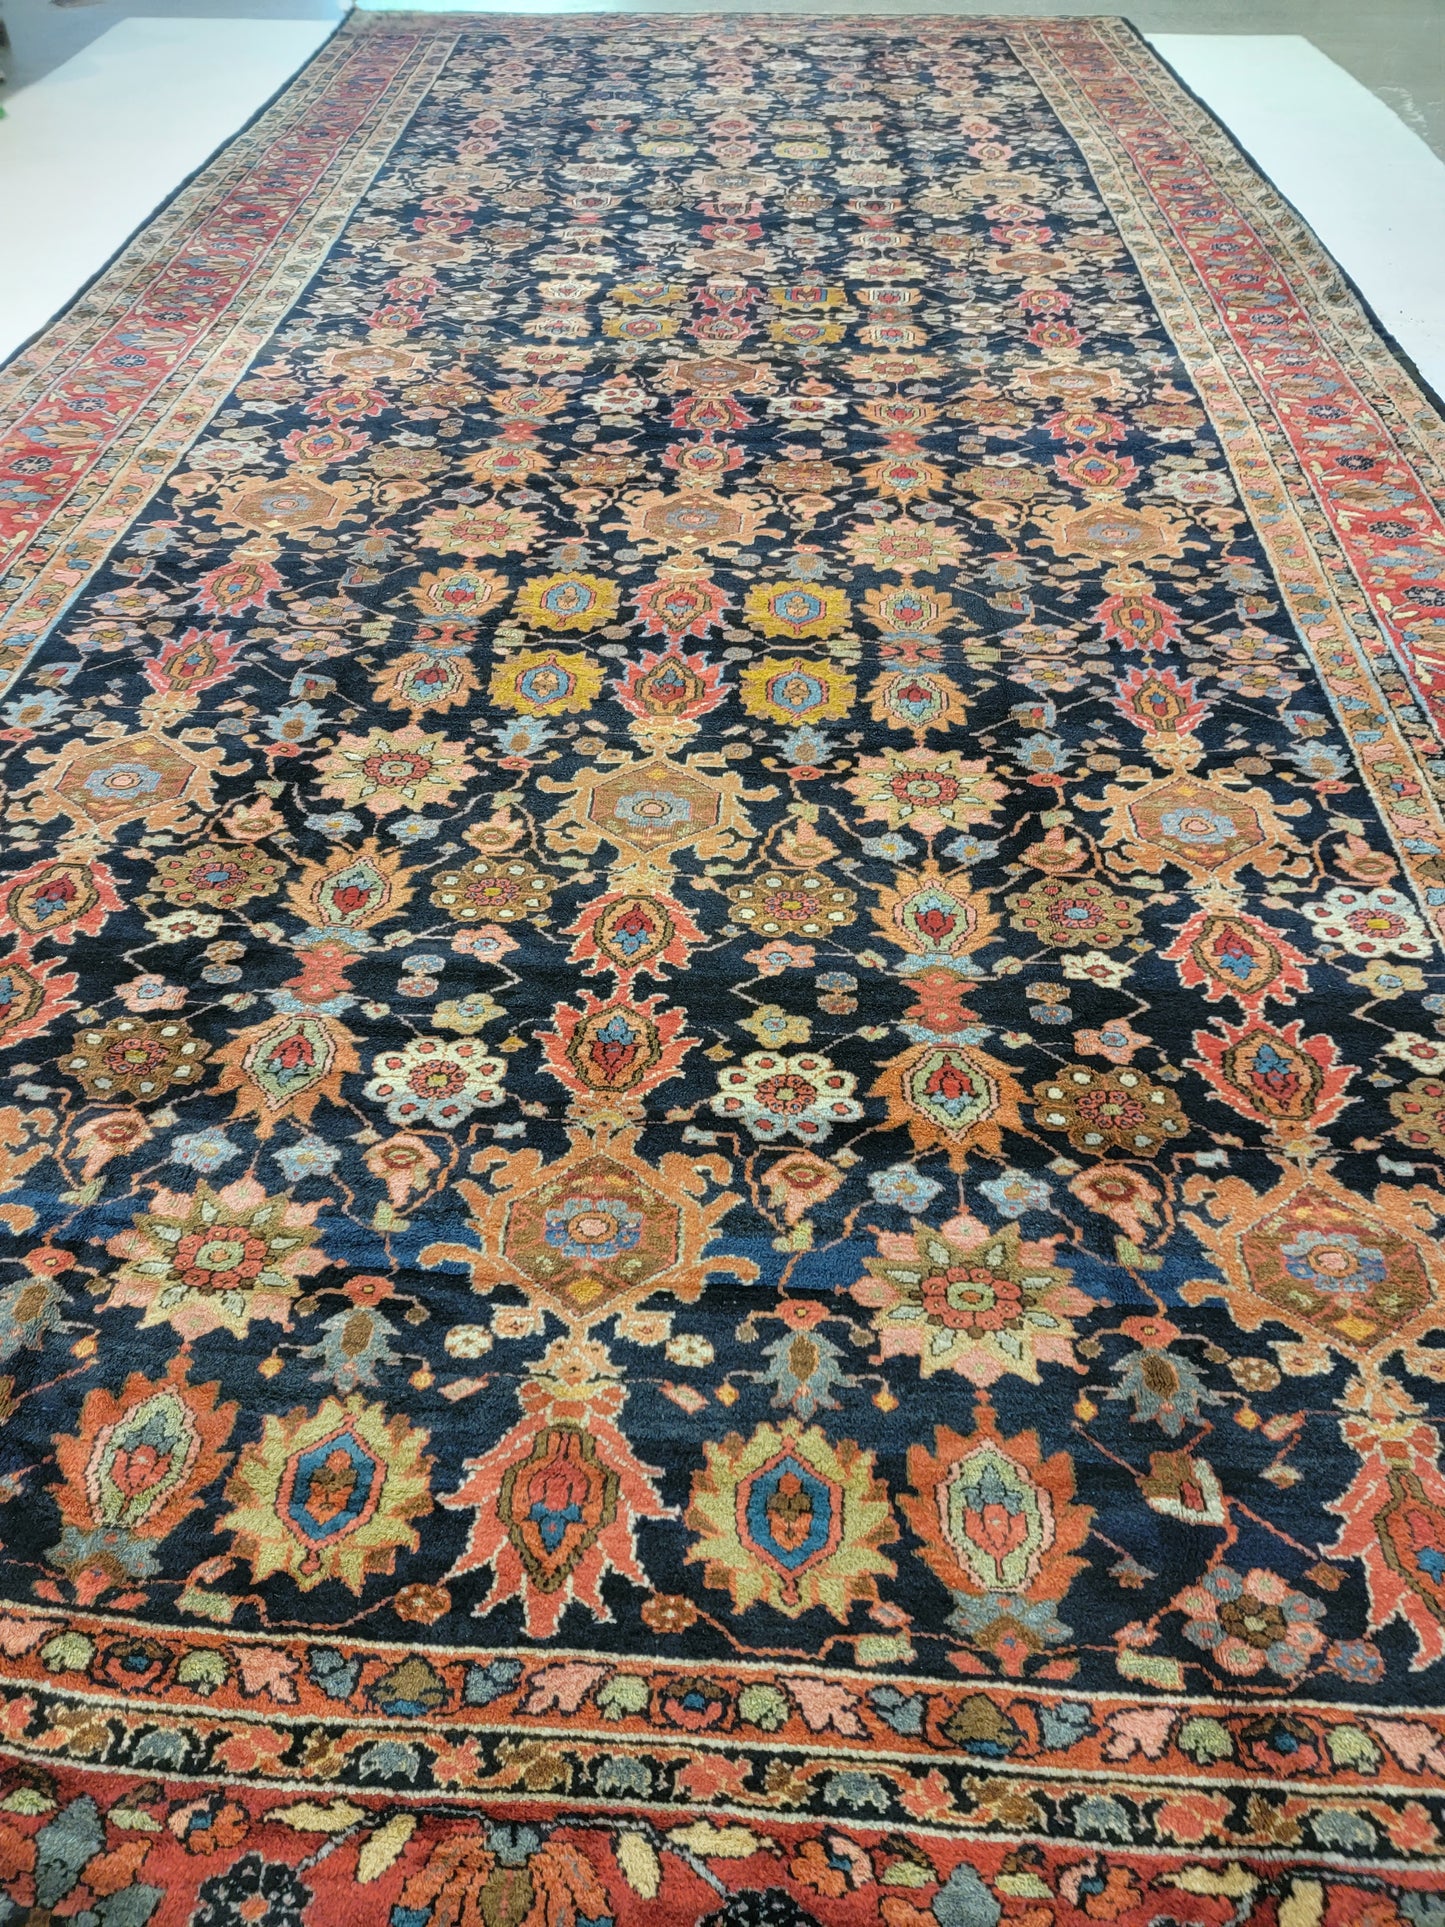 Antique Hand-Knotted Wool Area Rug Bijar 11'6" x 24'4"